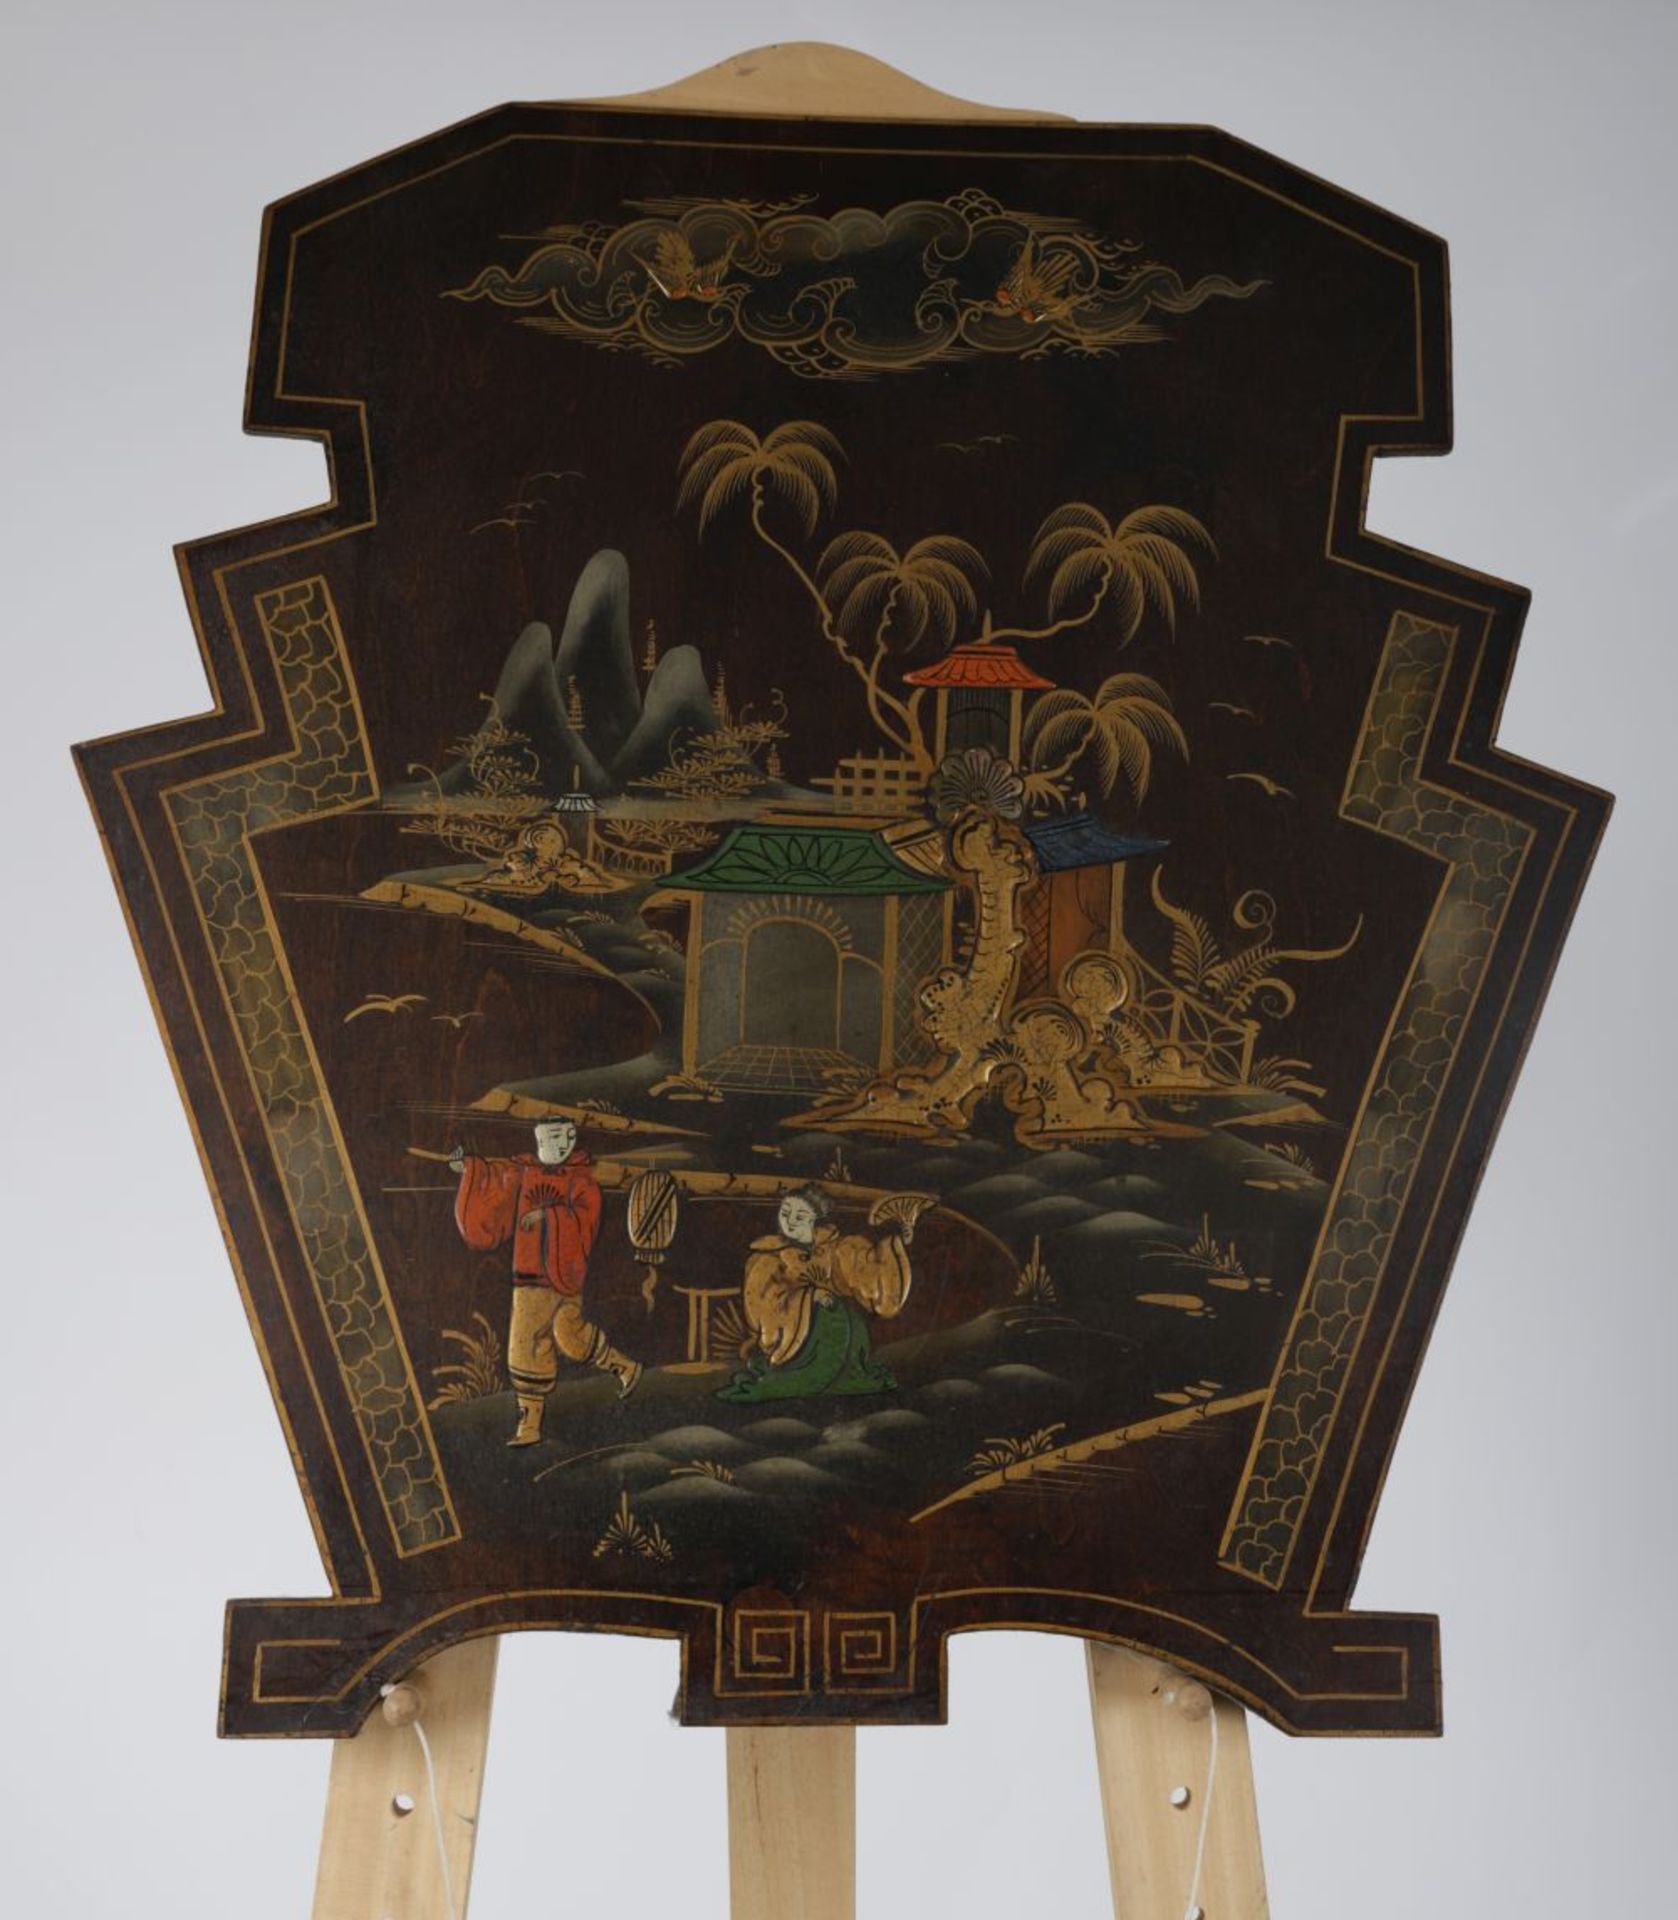 EDWARDIAN LACQUERED PLAQUE - Image 2 of 3